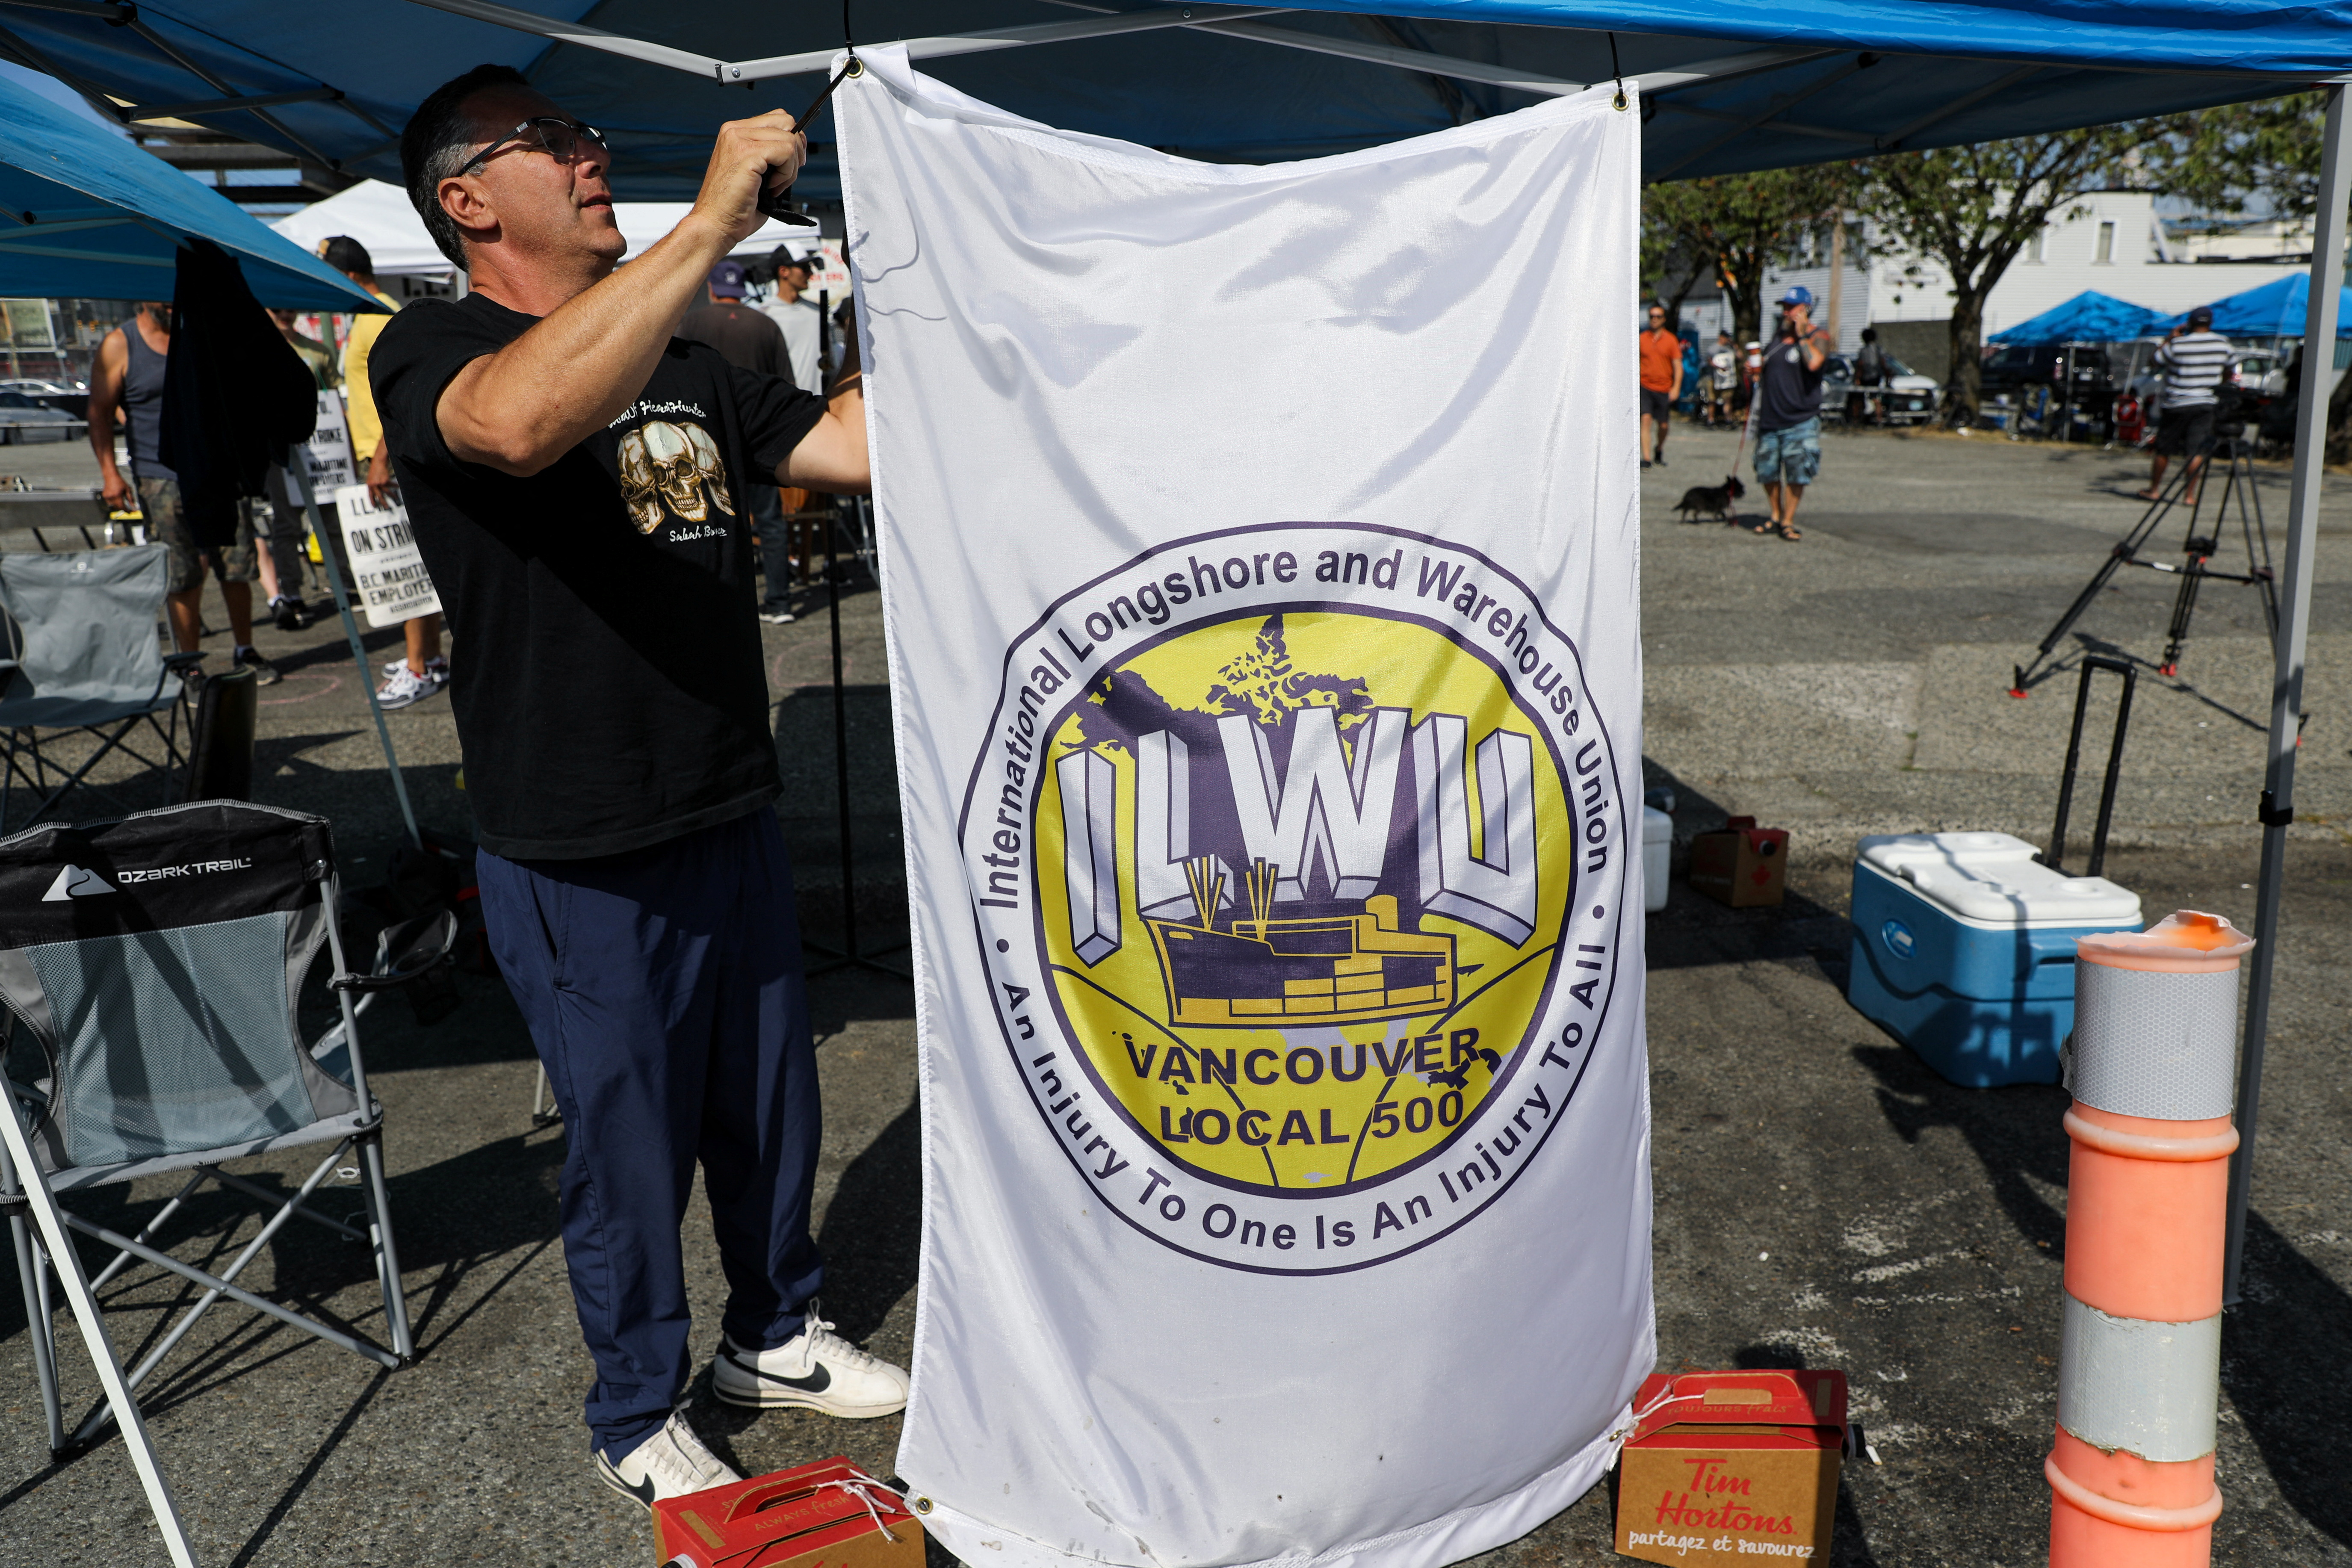 Union members with the International Longshore and Warehouse Union Canada (ILWU) gather, in Vancouver